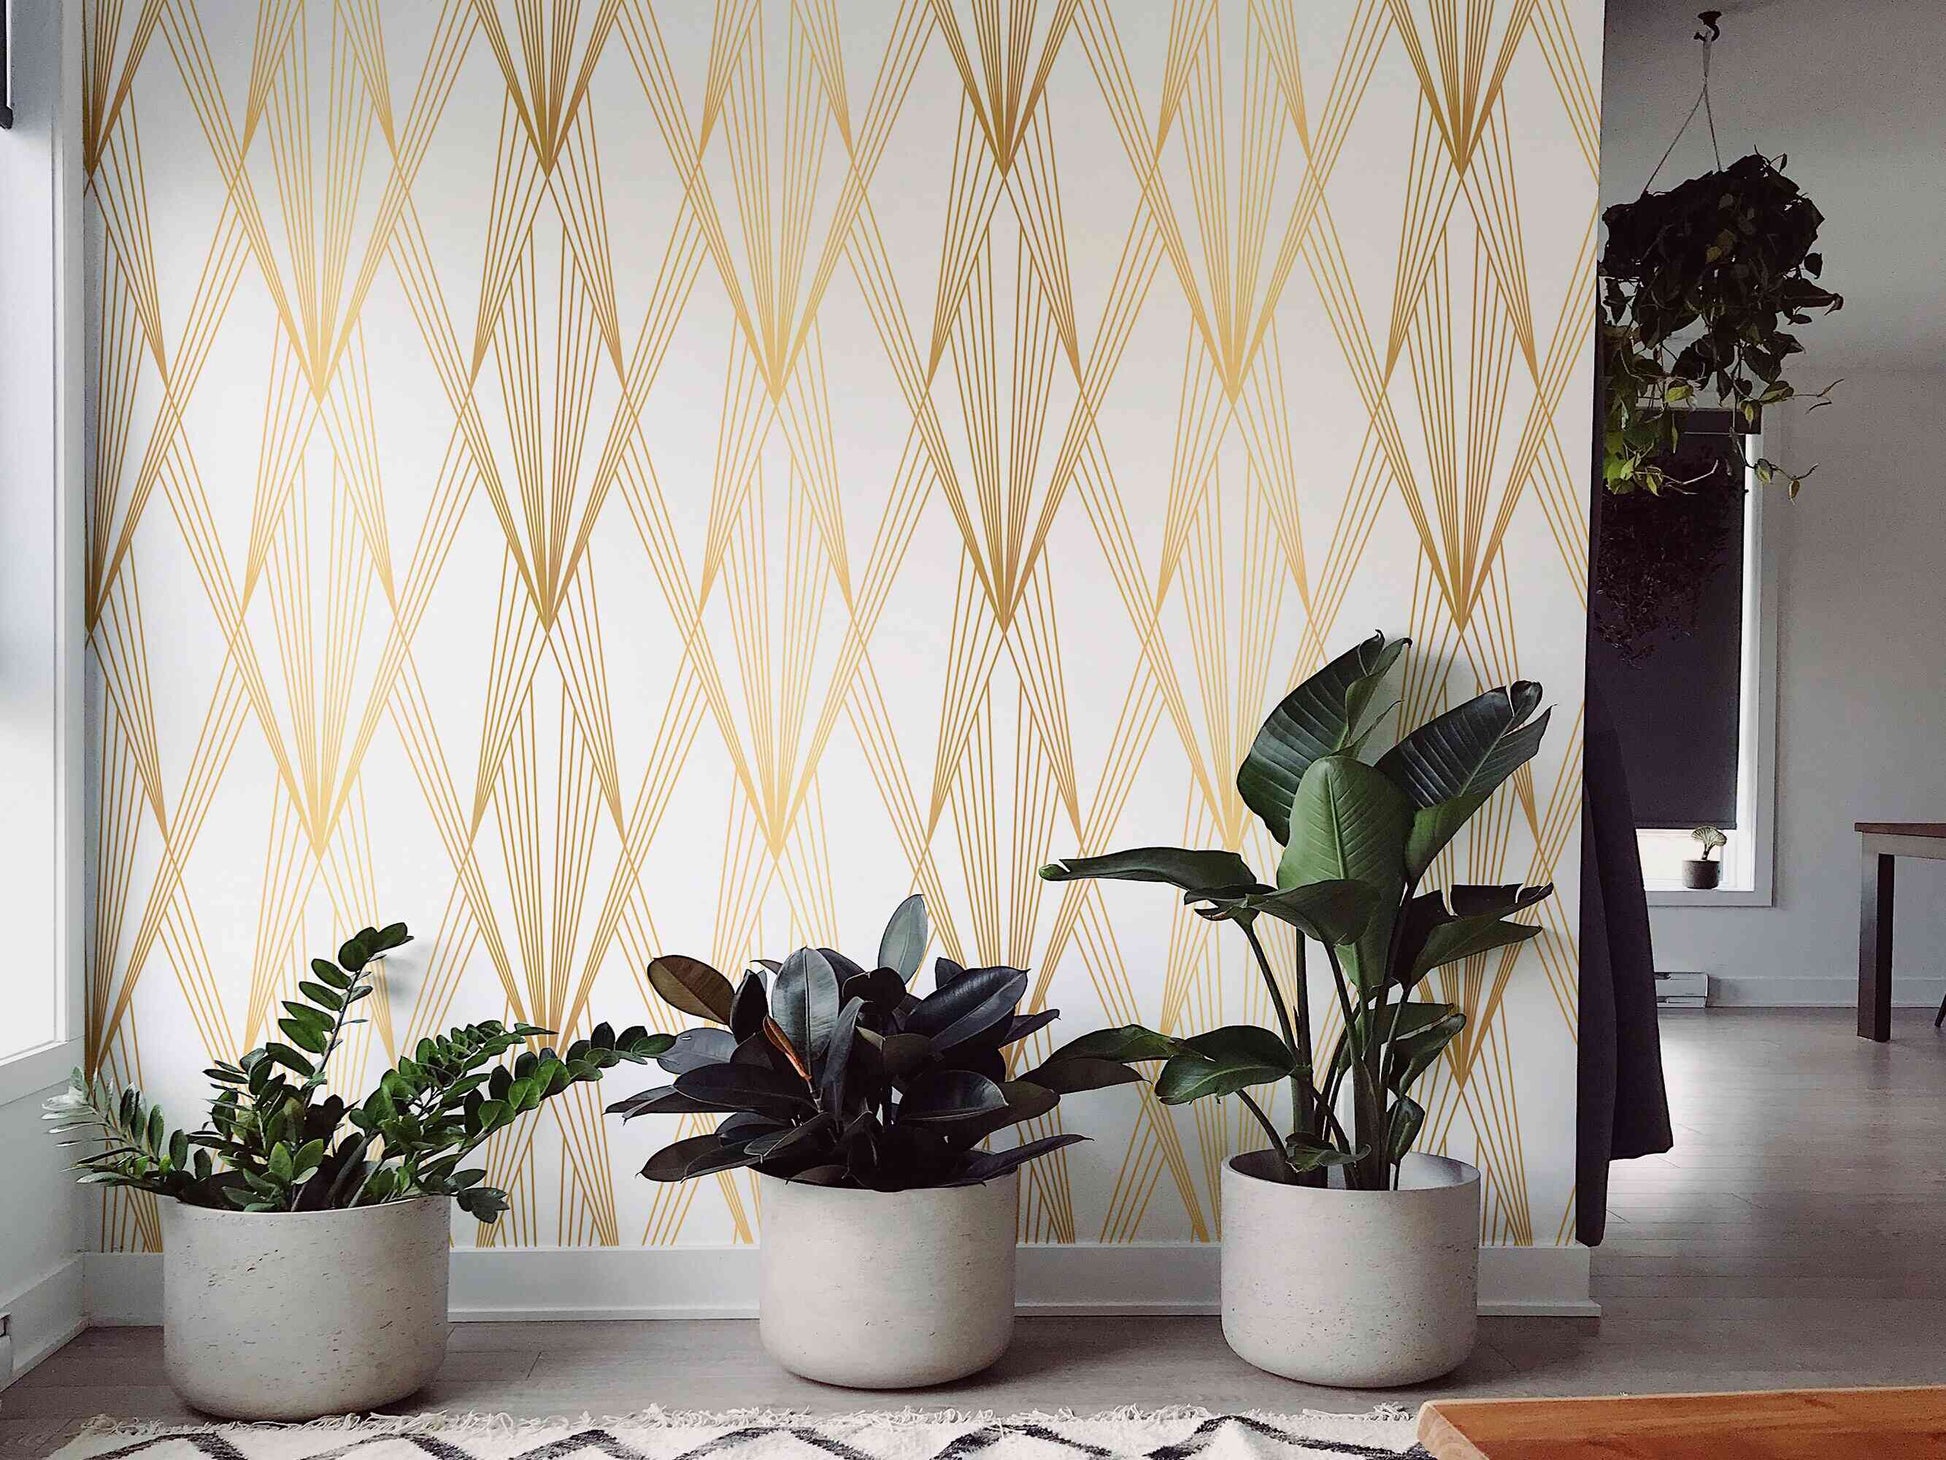 Chic removable mural wallpaper, perfect for a swift and sophisticated decor upgrade.